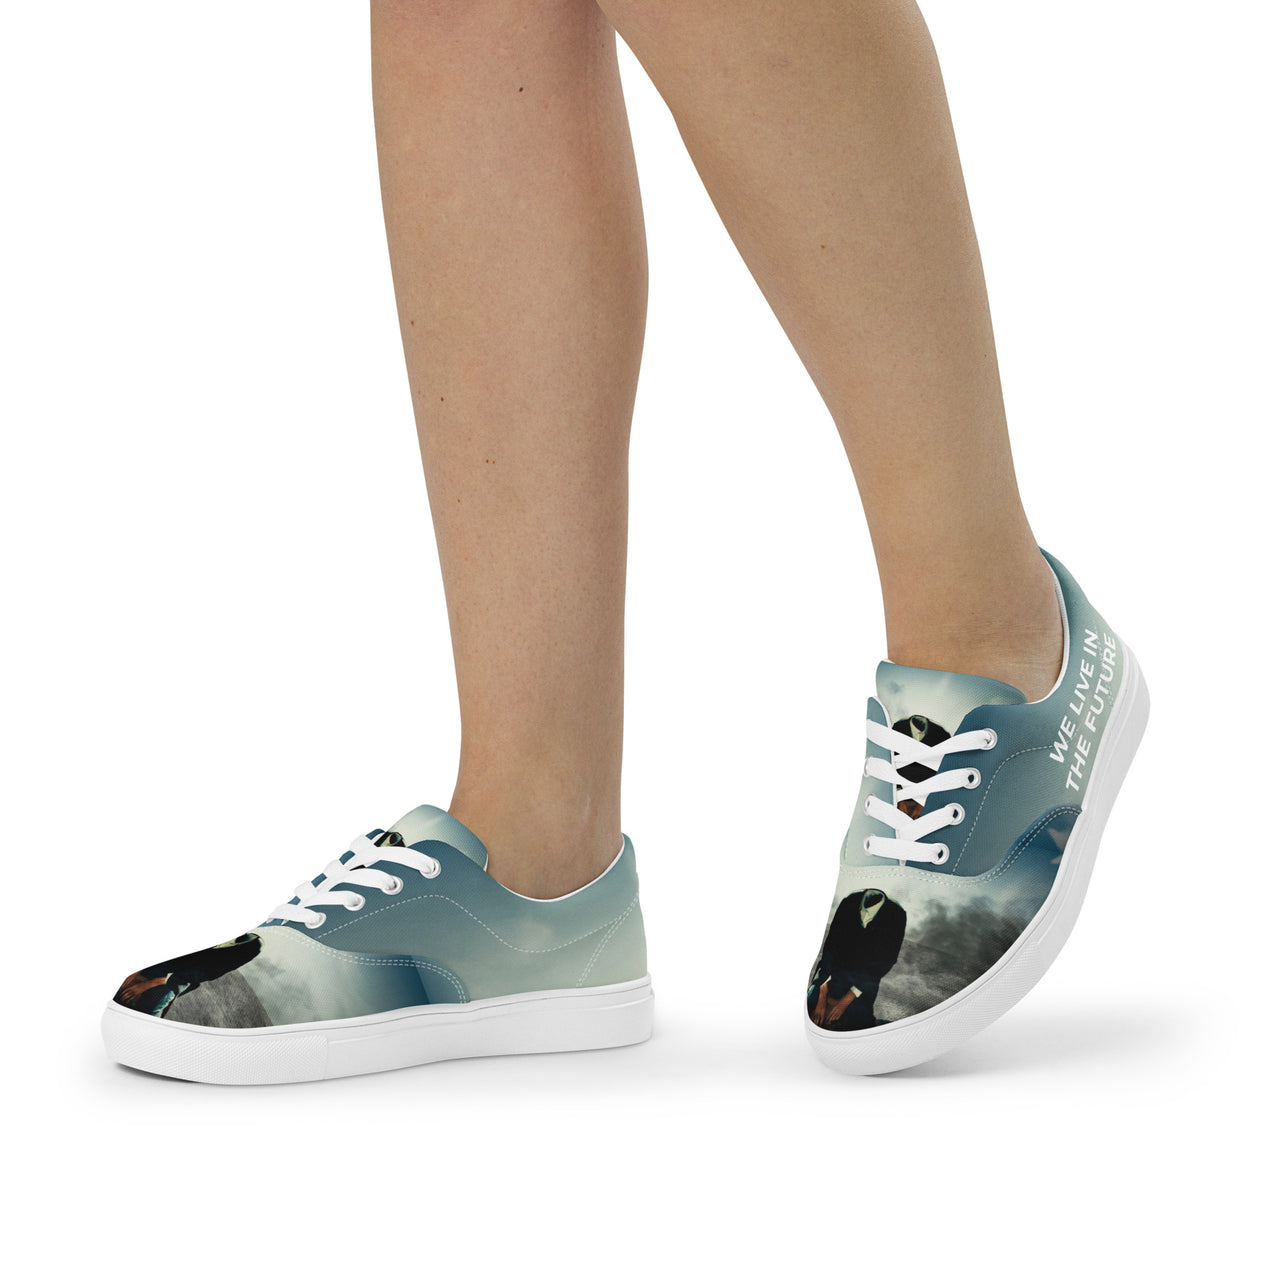 Women’s lace-up canvas shoes - Hollow Poet Design Special Edition from WE LIVE IN THE FUTURE